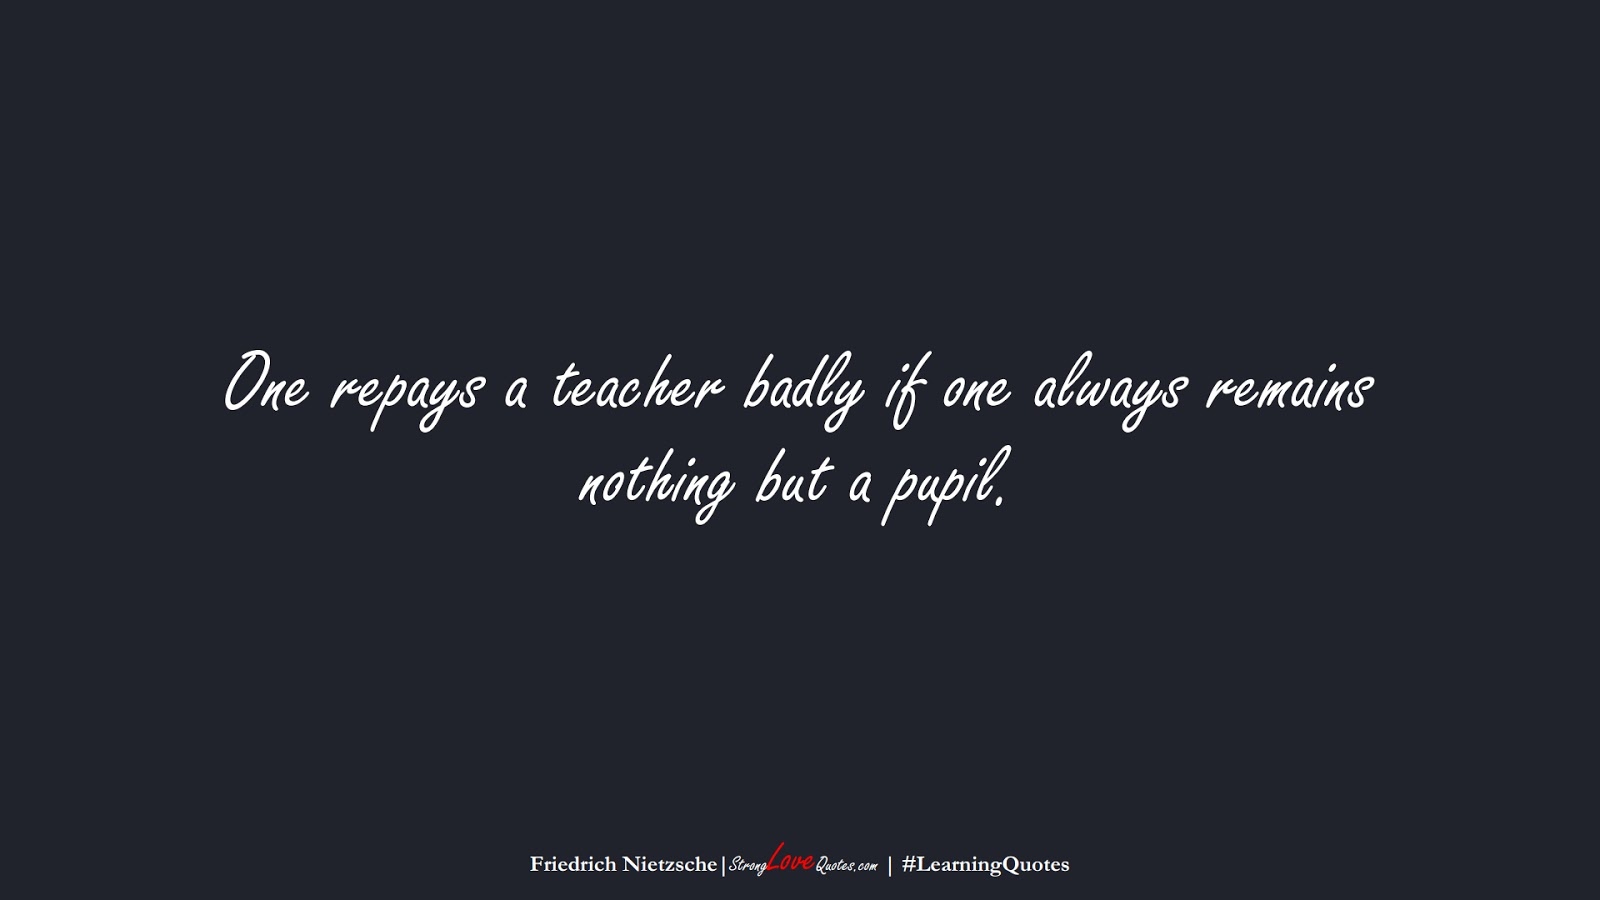 One repays a teacher badly if one always remains nothing but a pupil. (Friedrich Nietzsche);  #LearningQuotes